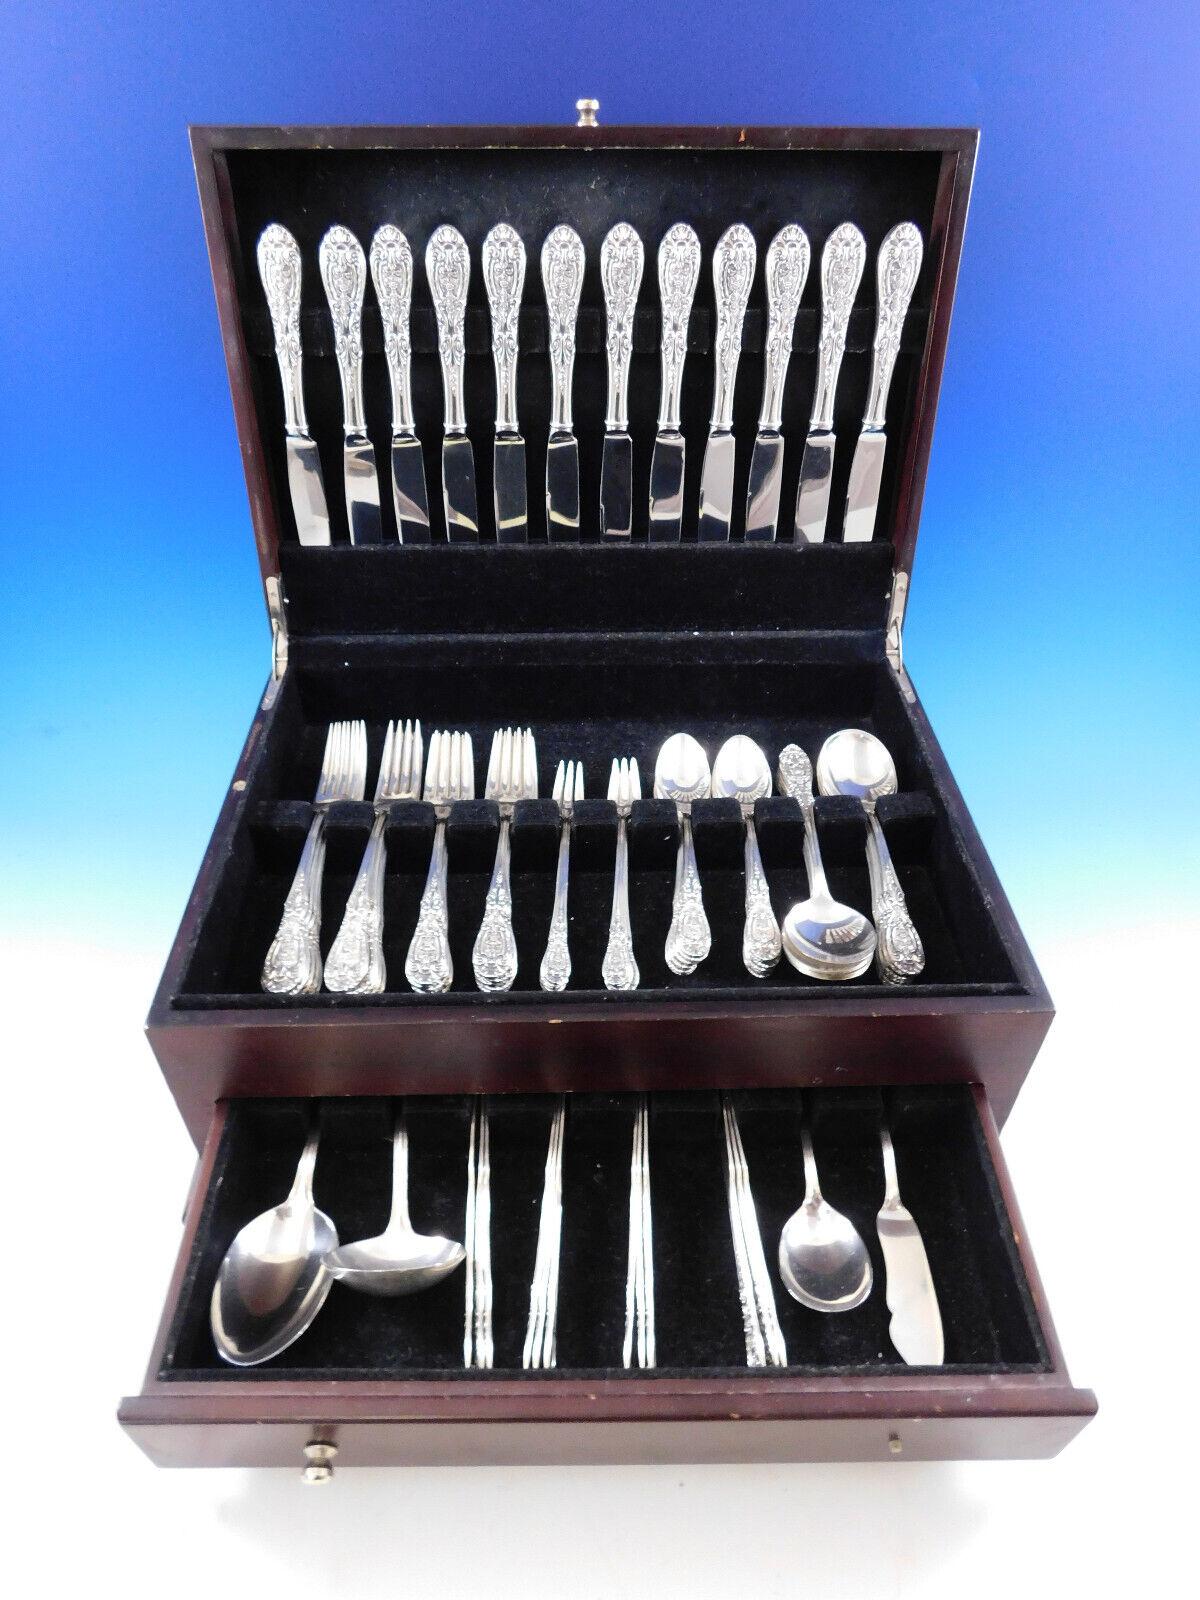 Southern Grandeur by Easterling Sterling Silver Flatware set, 88 pieces. This set includes:

12 knives, 8 3/4